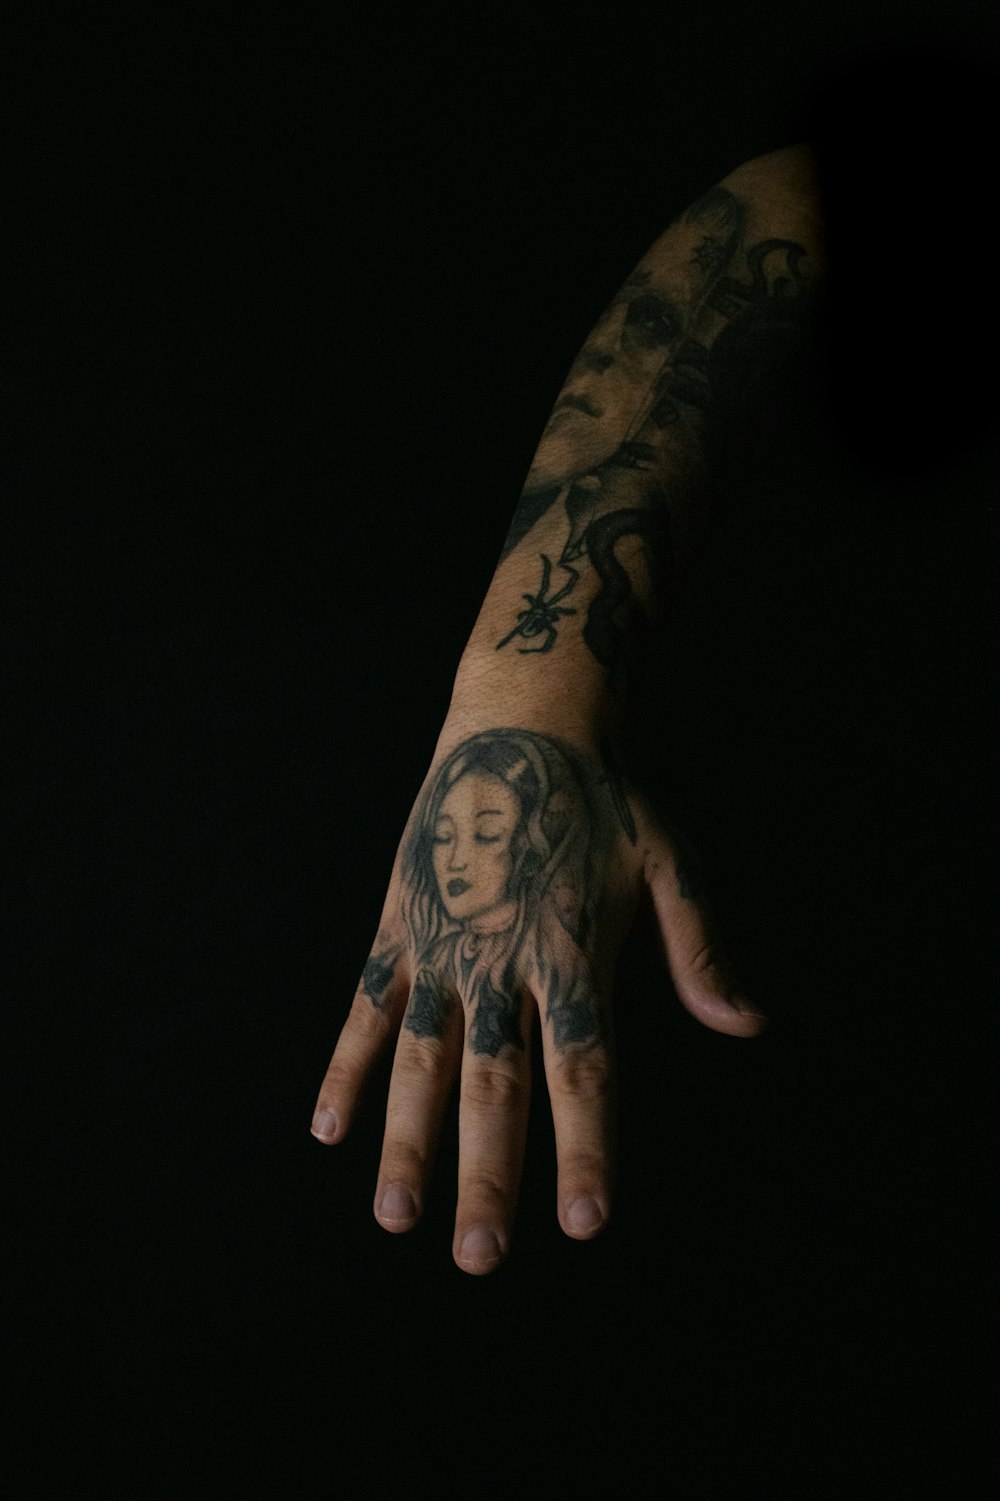 a person's hand with a tattoo on it